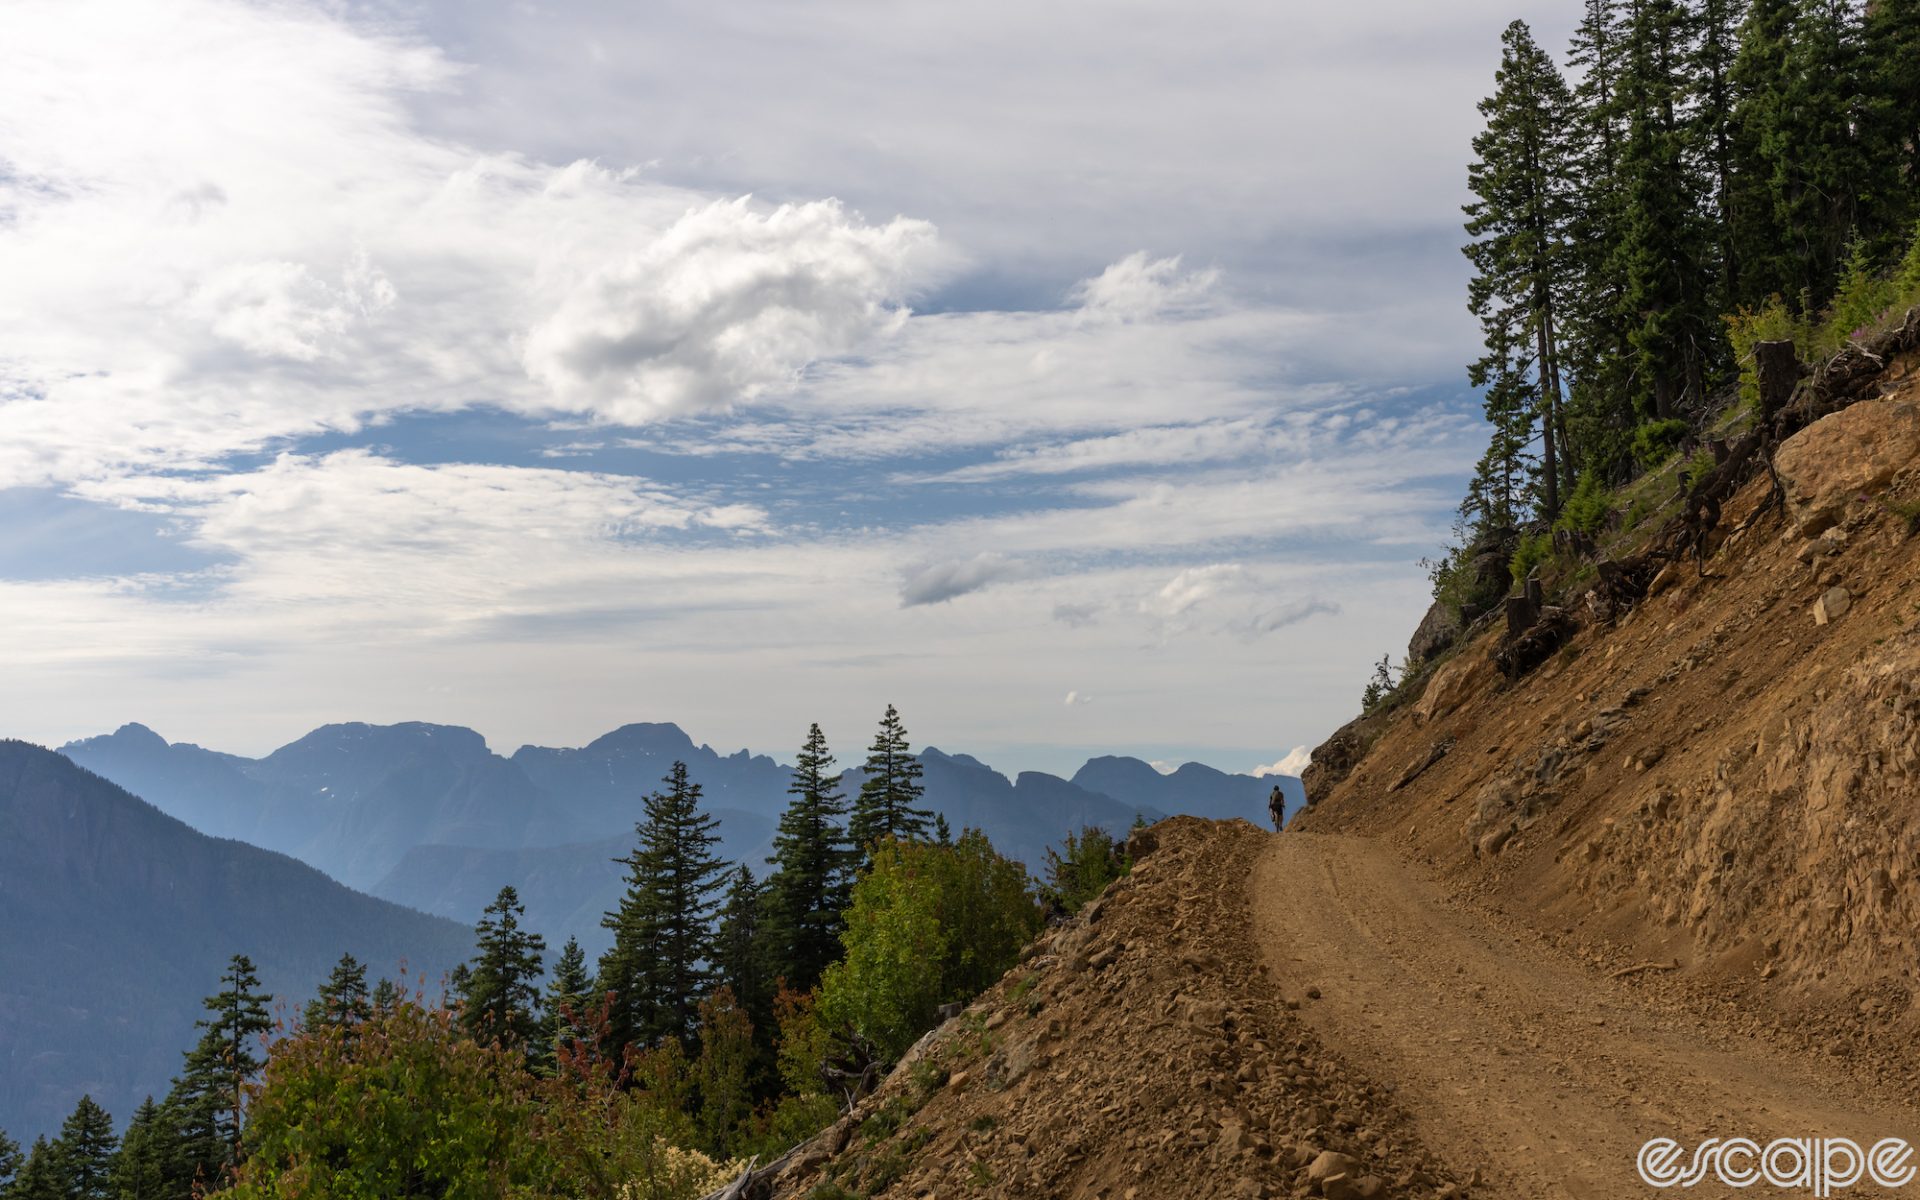 A bikepacker rides an unimproved dirt road high in the mountains. The rider is in the distance, all alone against a silhouette of purple peaks in the background.